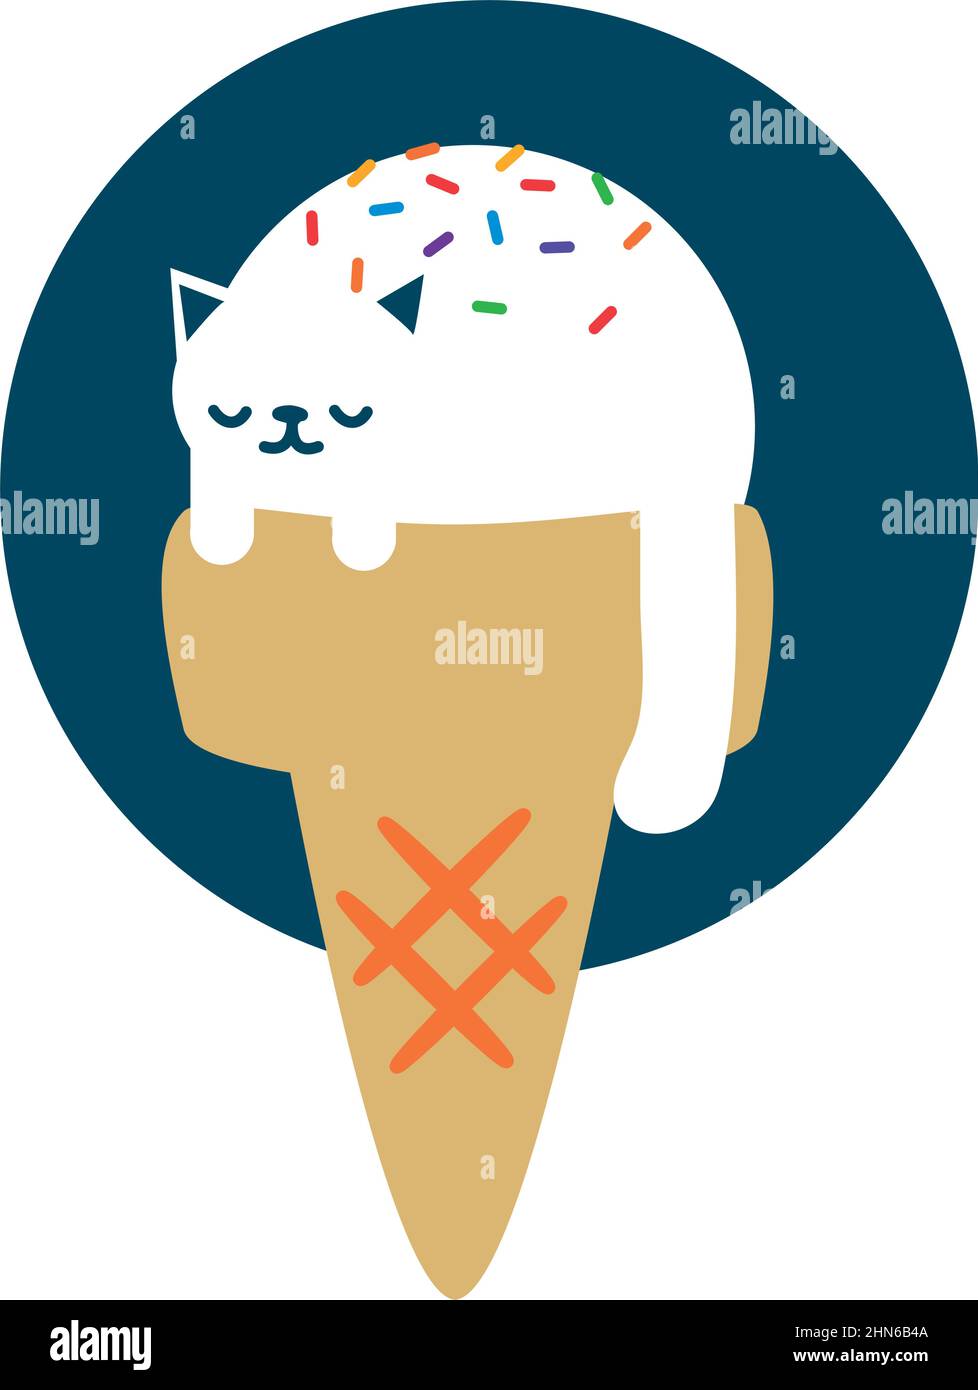 360+ Cat Eat Ice Cream Stock Photos, Pictures & Royalty-Free Images - iStock